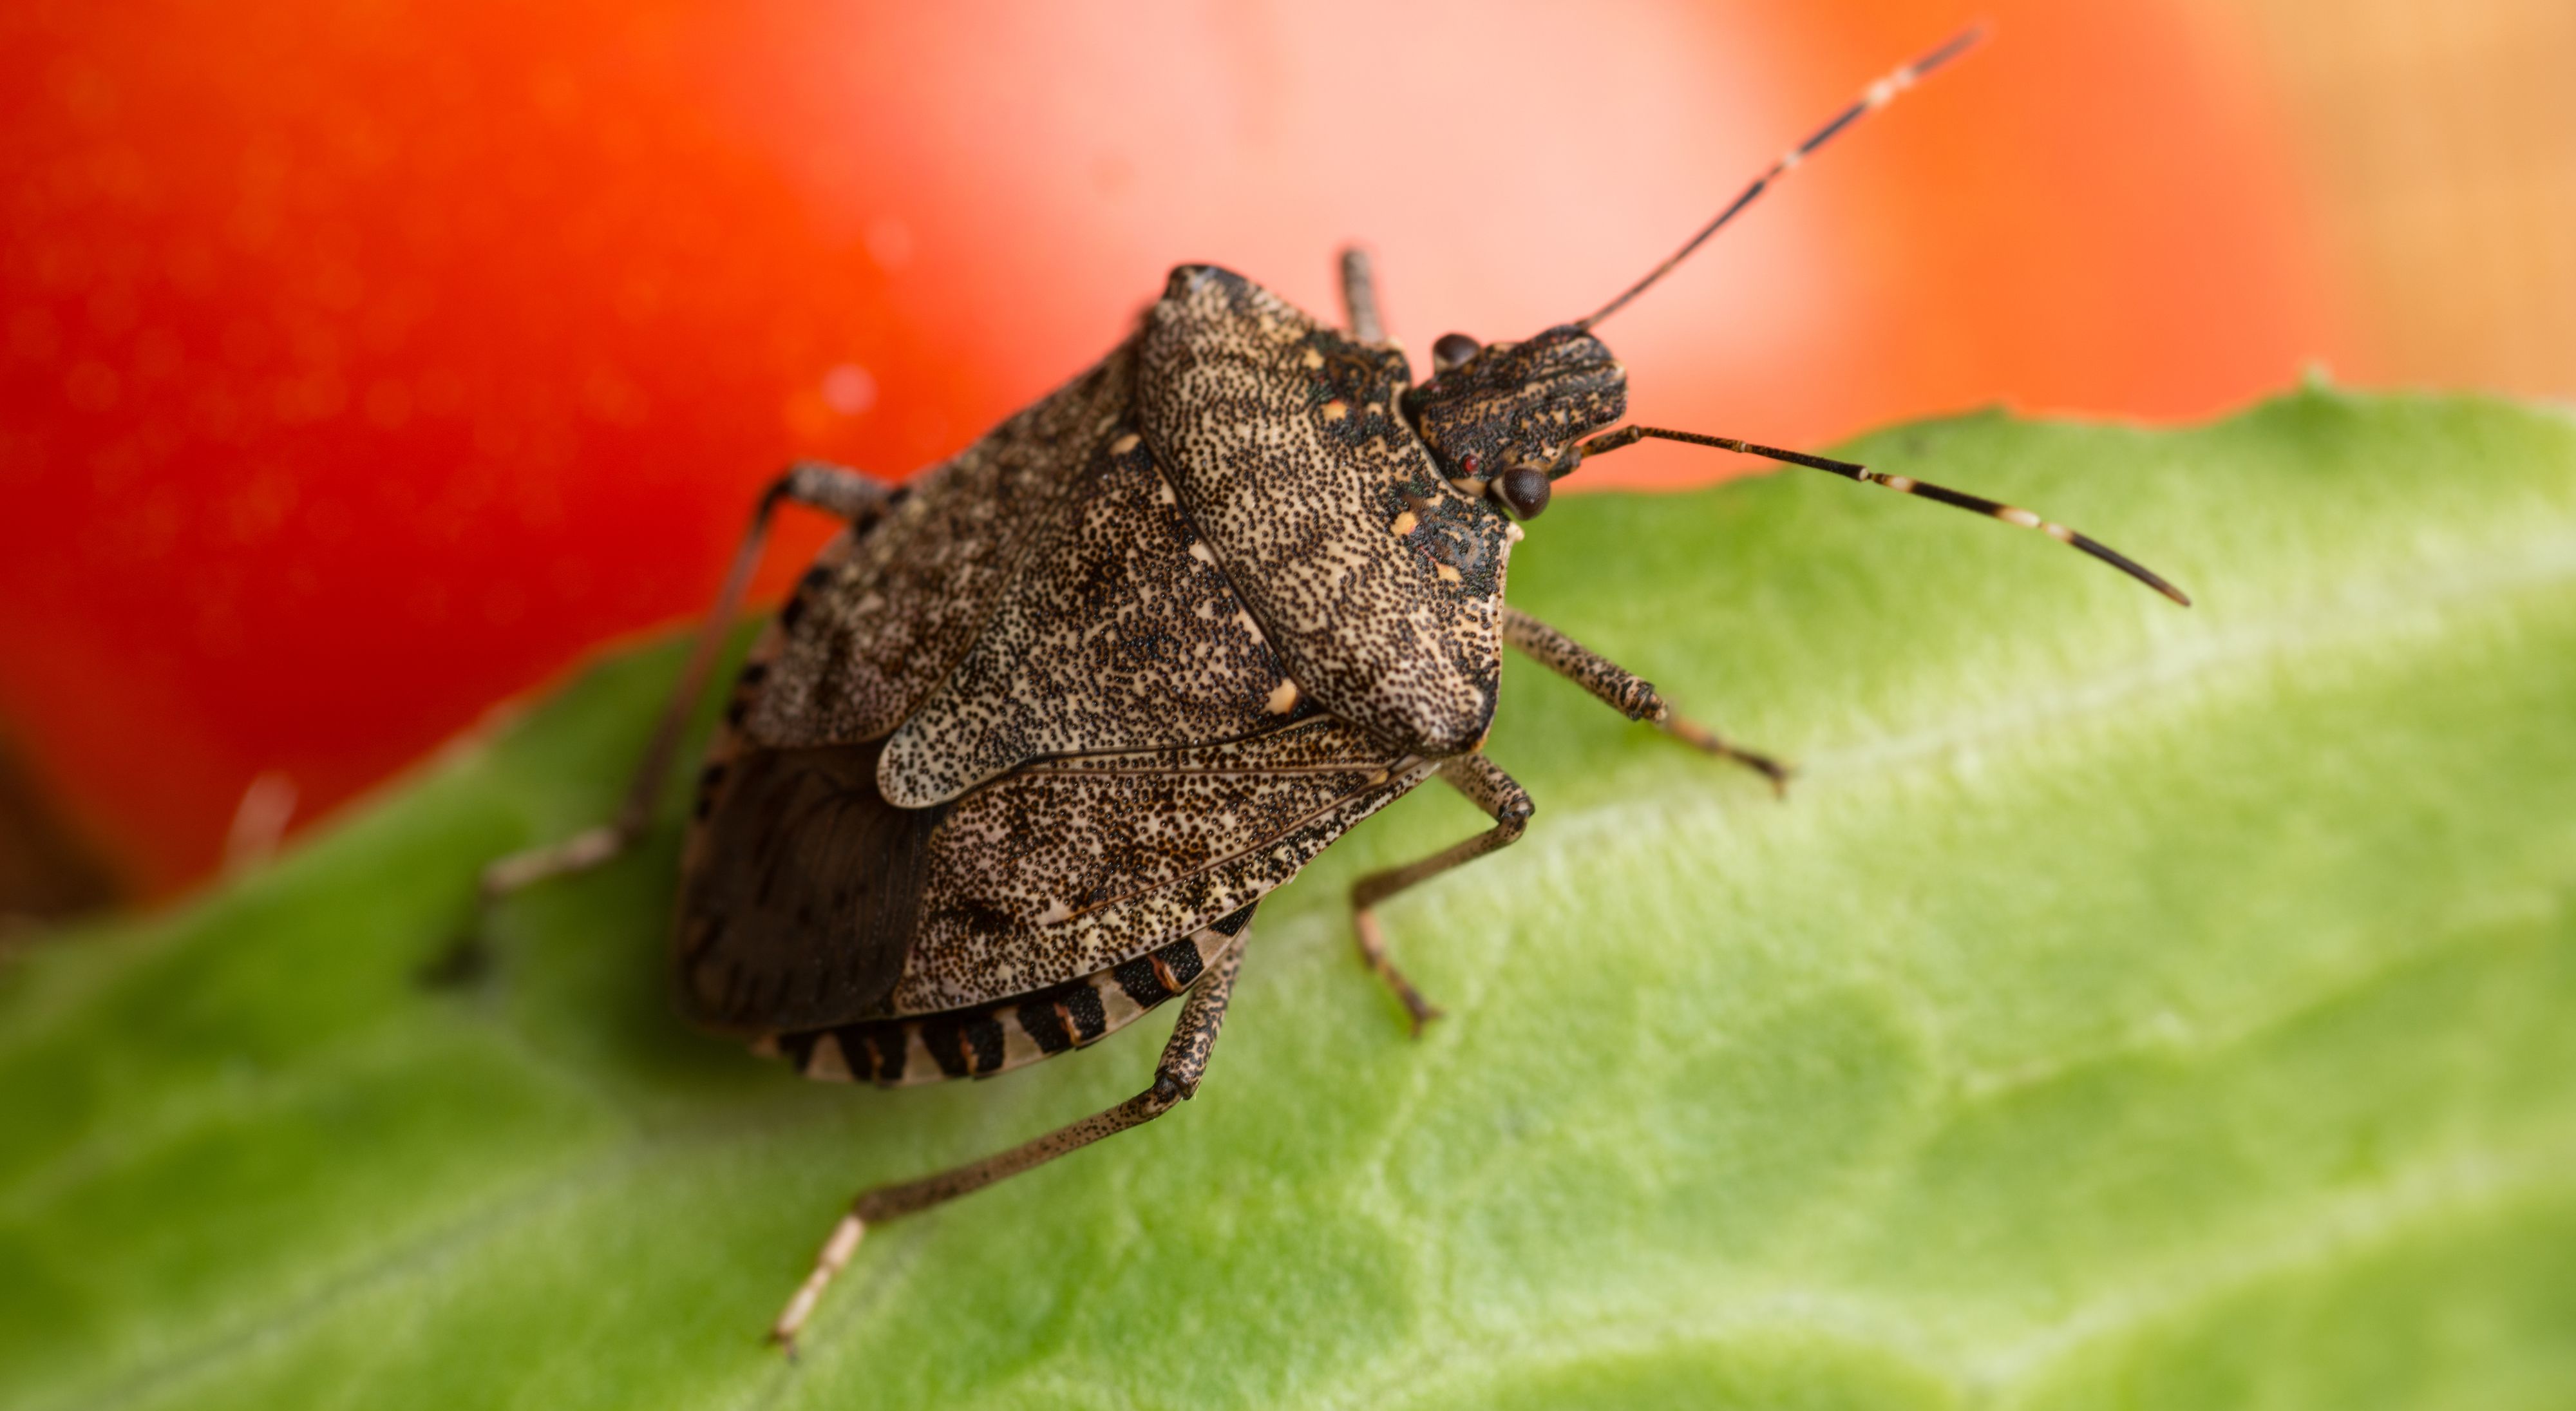 How to Get Rid of Stink Bugs in House - Tips for Killing Stink Bugs